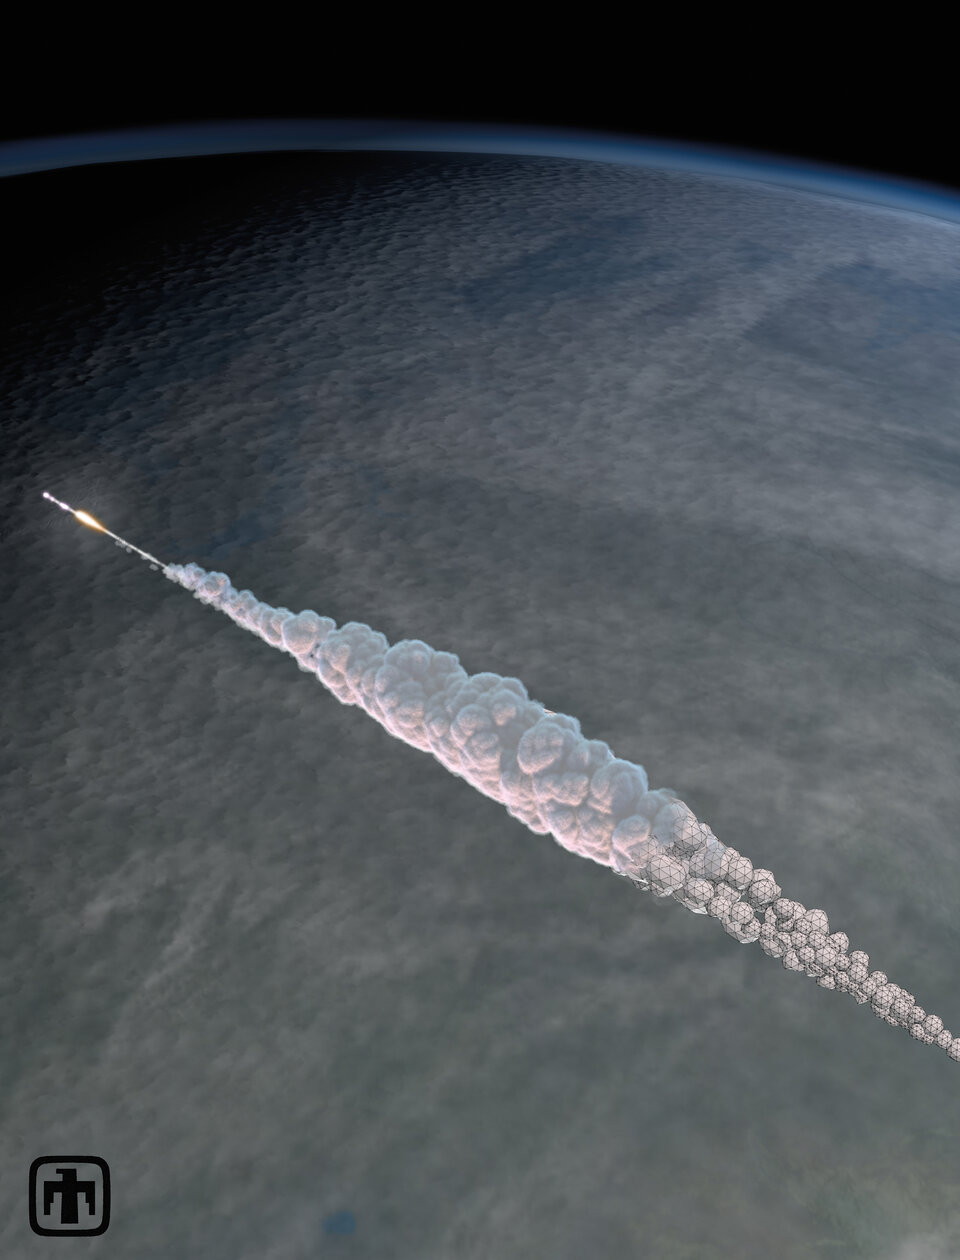 Chelyabinsk a decade on: the Sun's invisible asteroids